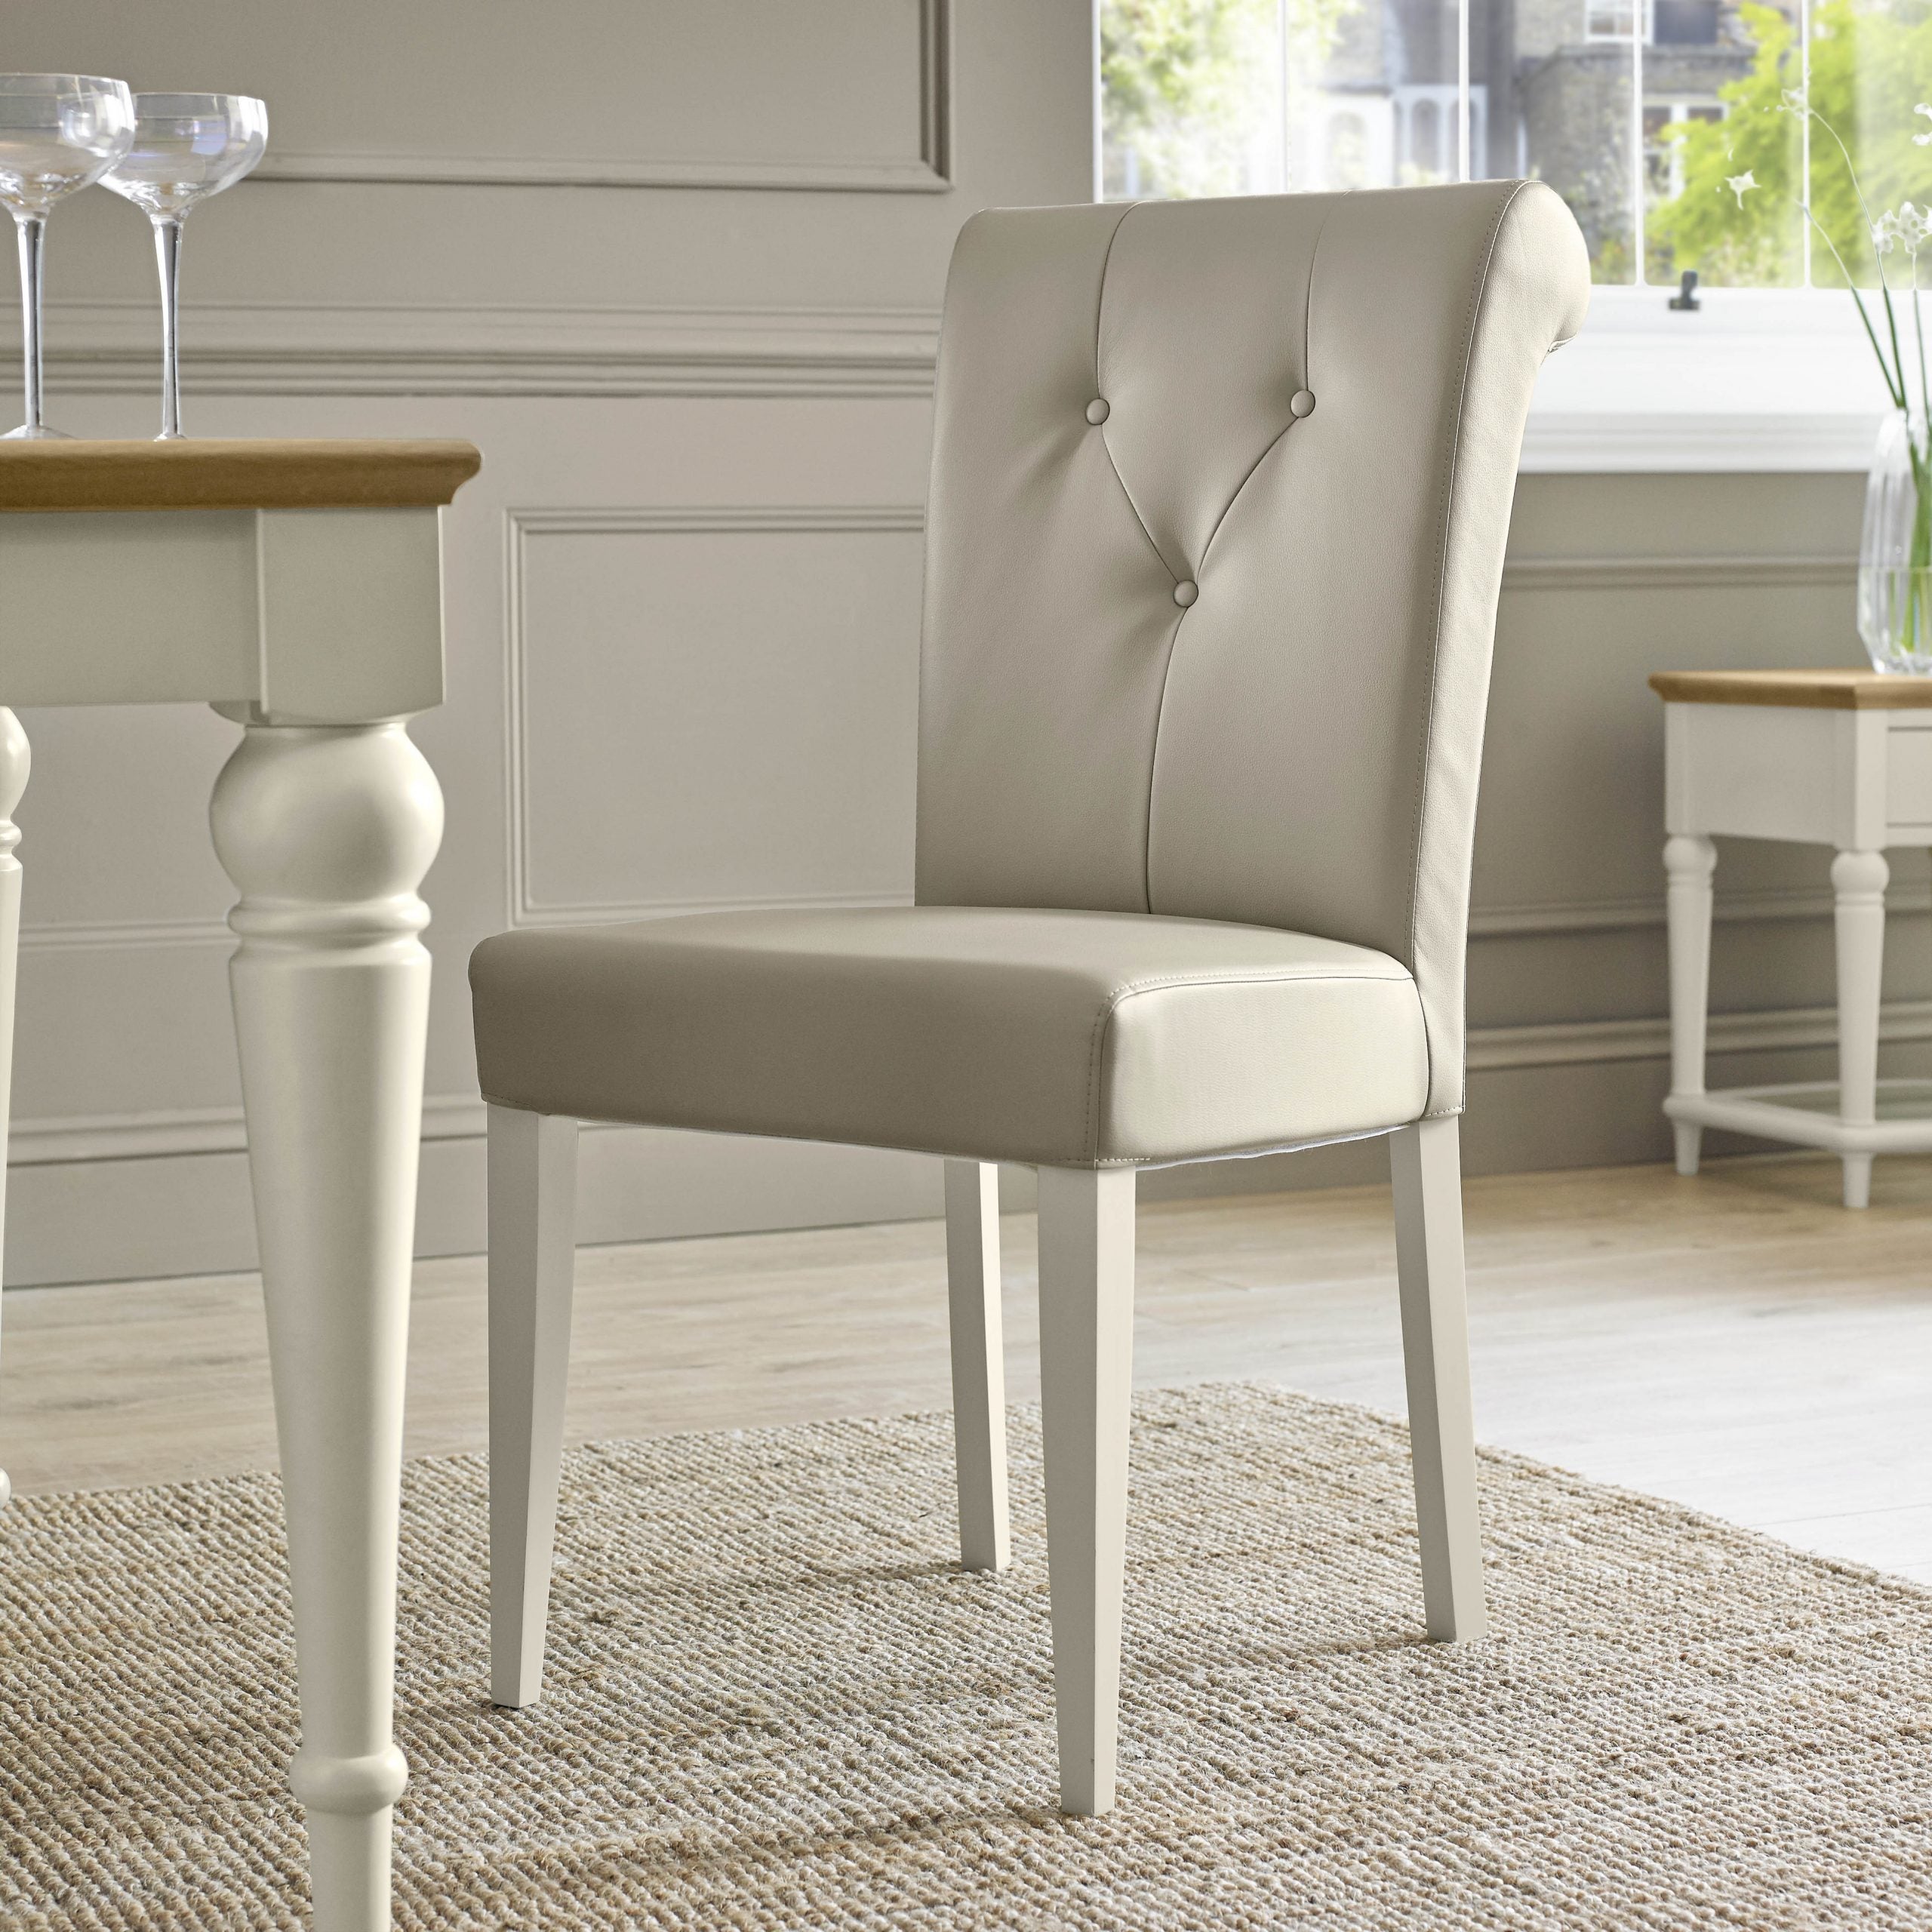 Montreux Leather Dining Chair - Ivory from UpstairsDownstairs.ie